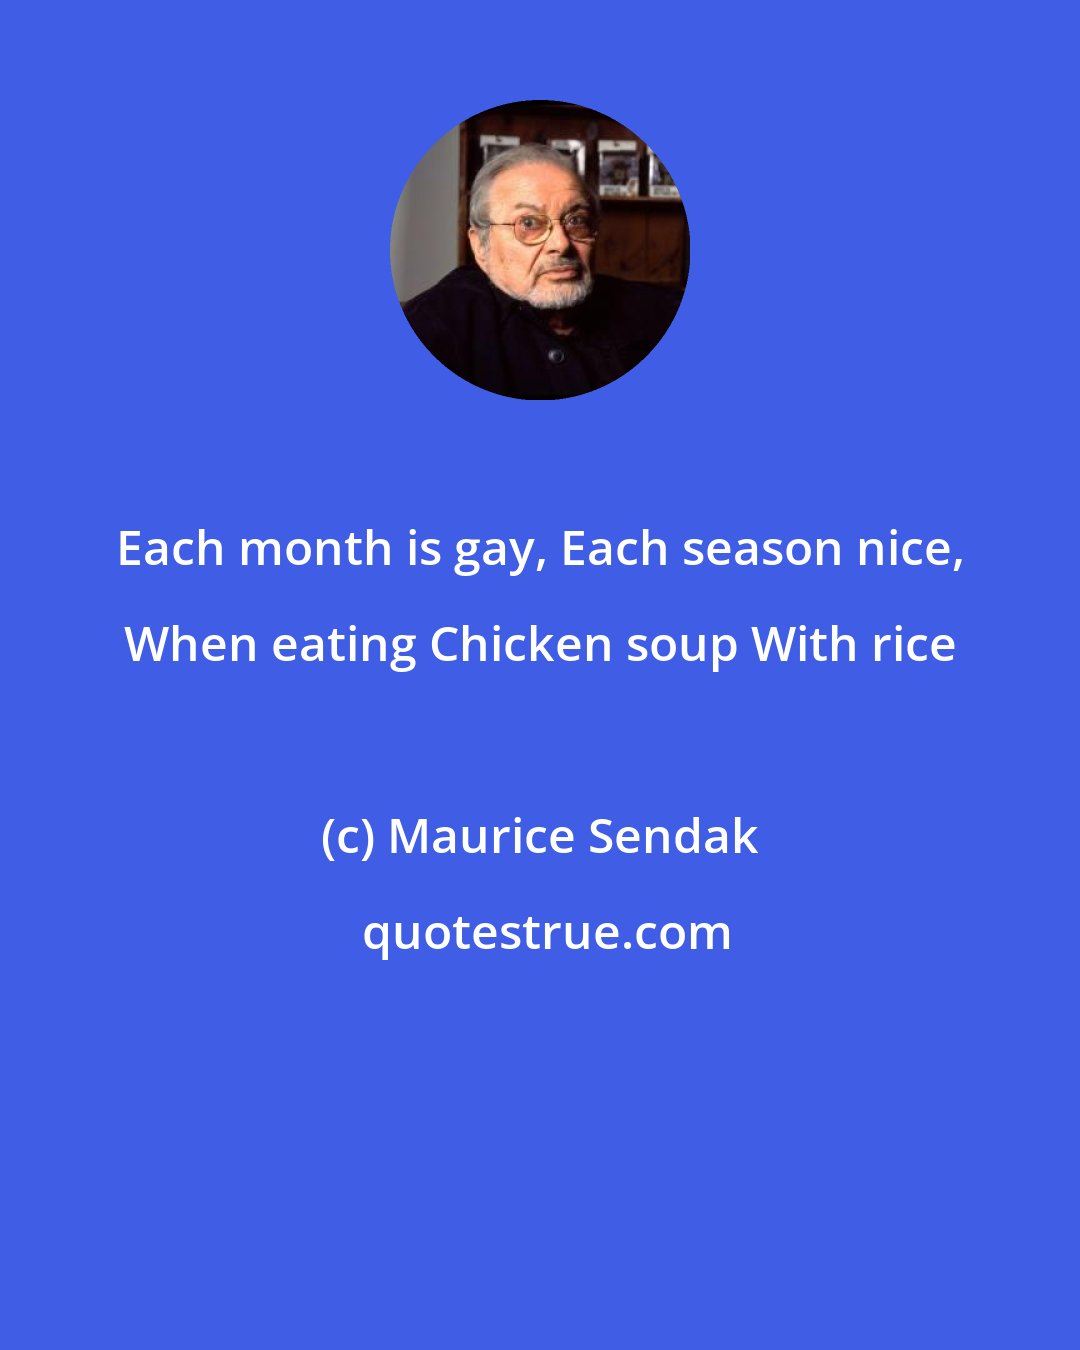 Maurice Sendak: Each month is gay, Each season nice, When eating Chicken soup With rice